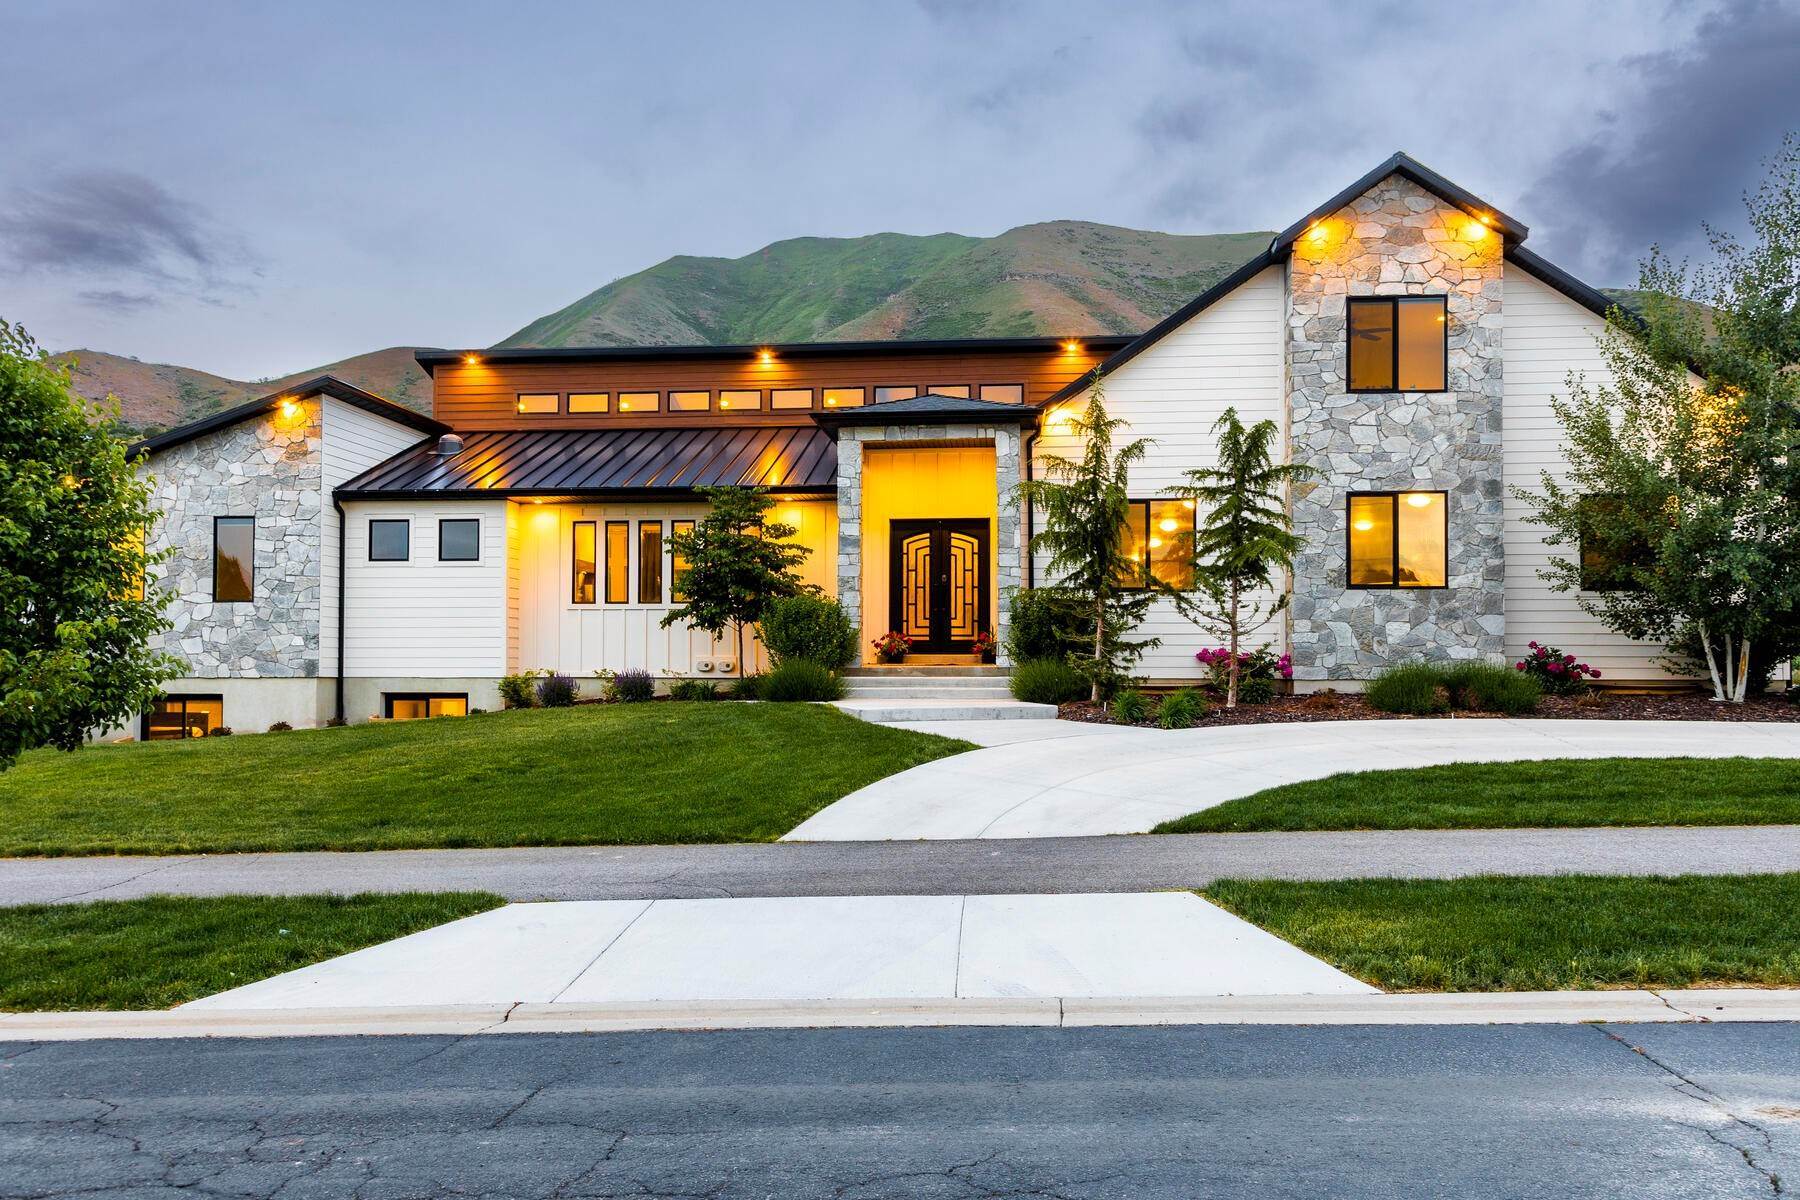 Single Family Homes for Sale at Contemporary Home With Theater, Indoor Field, Outdoor Field & Huge 8-Car Garage 1030 N 1800 E Mapleton, Utah 84664 United States